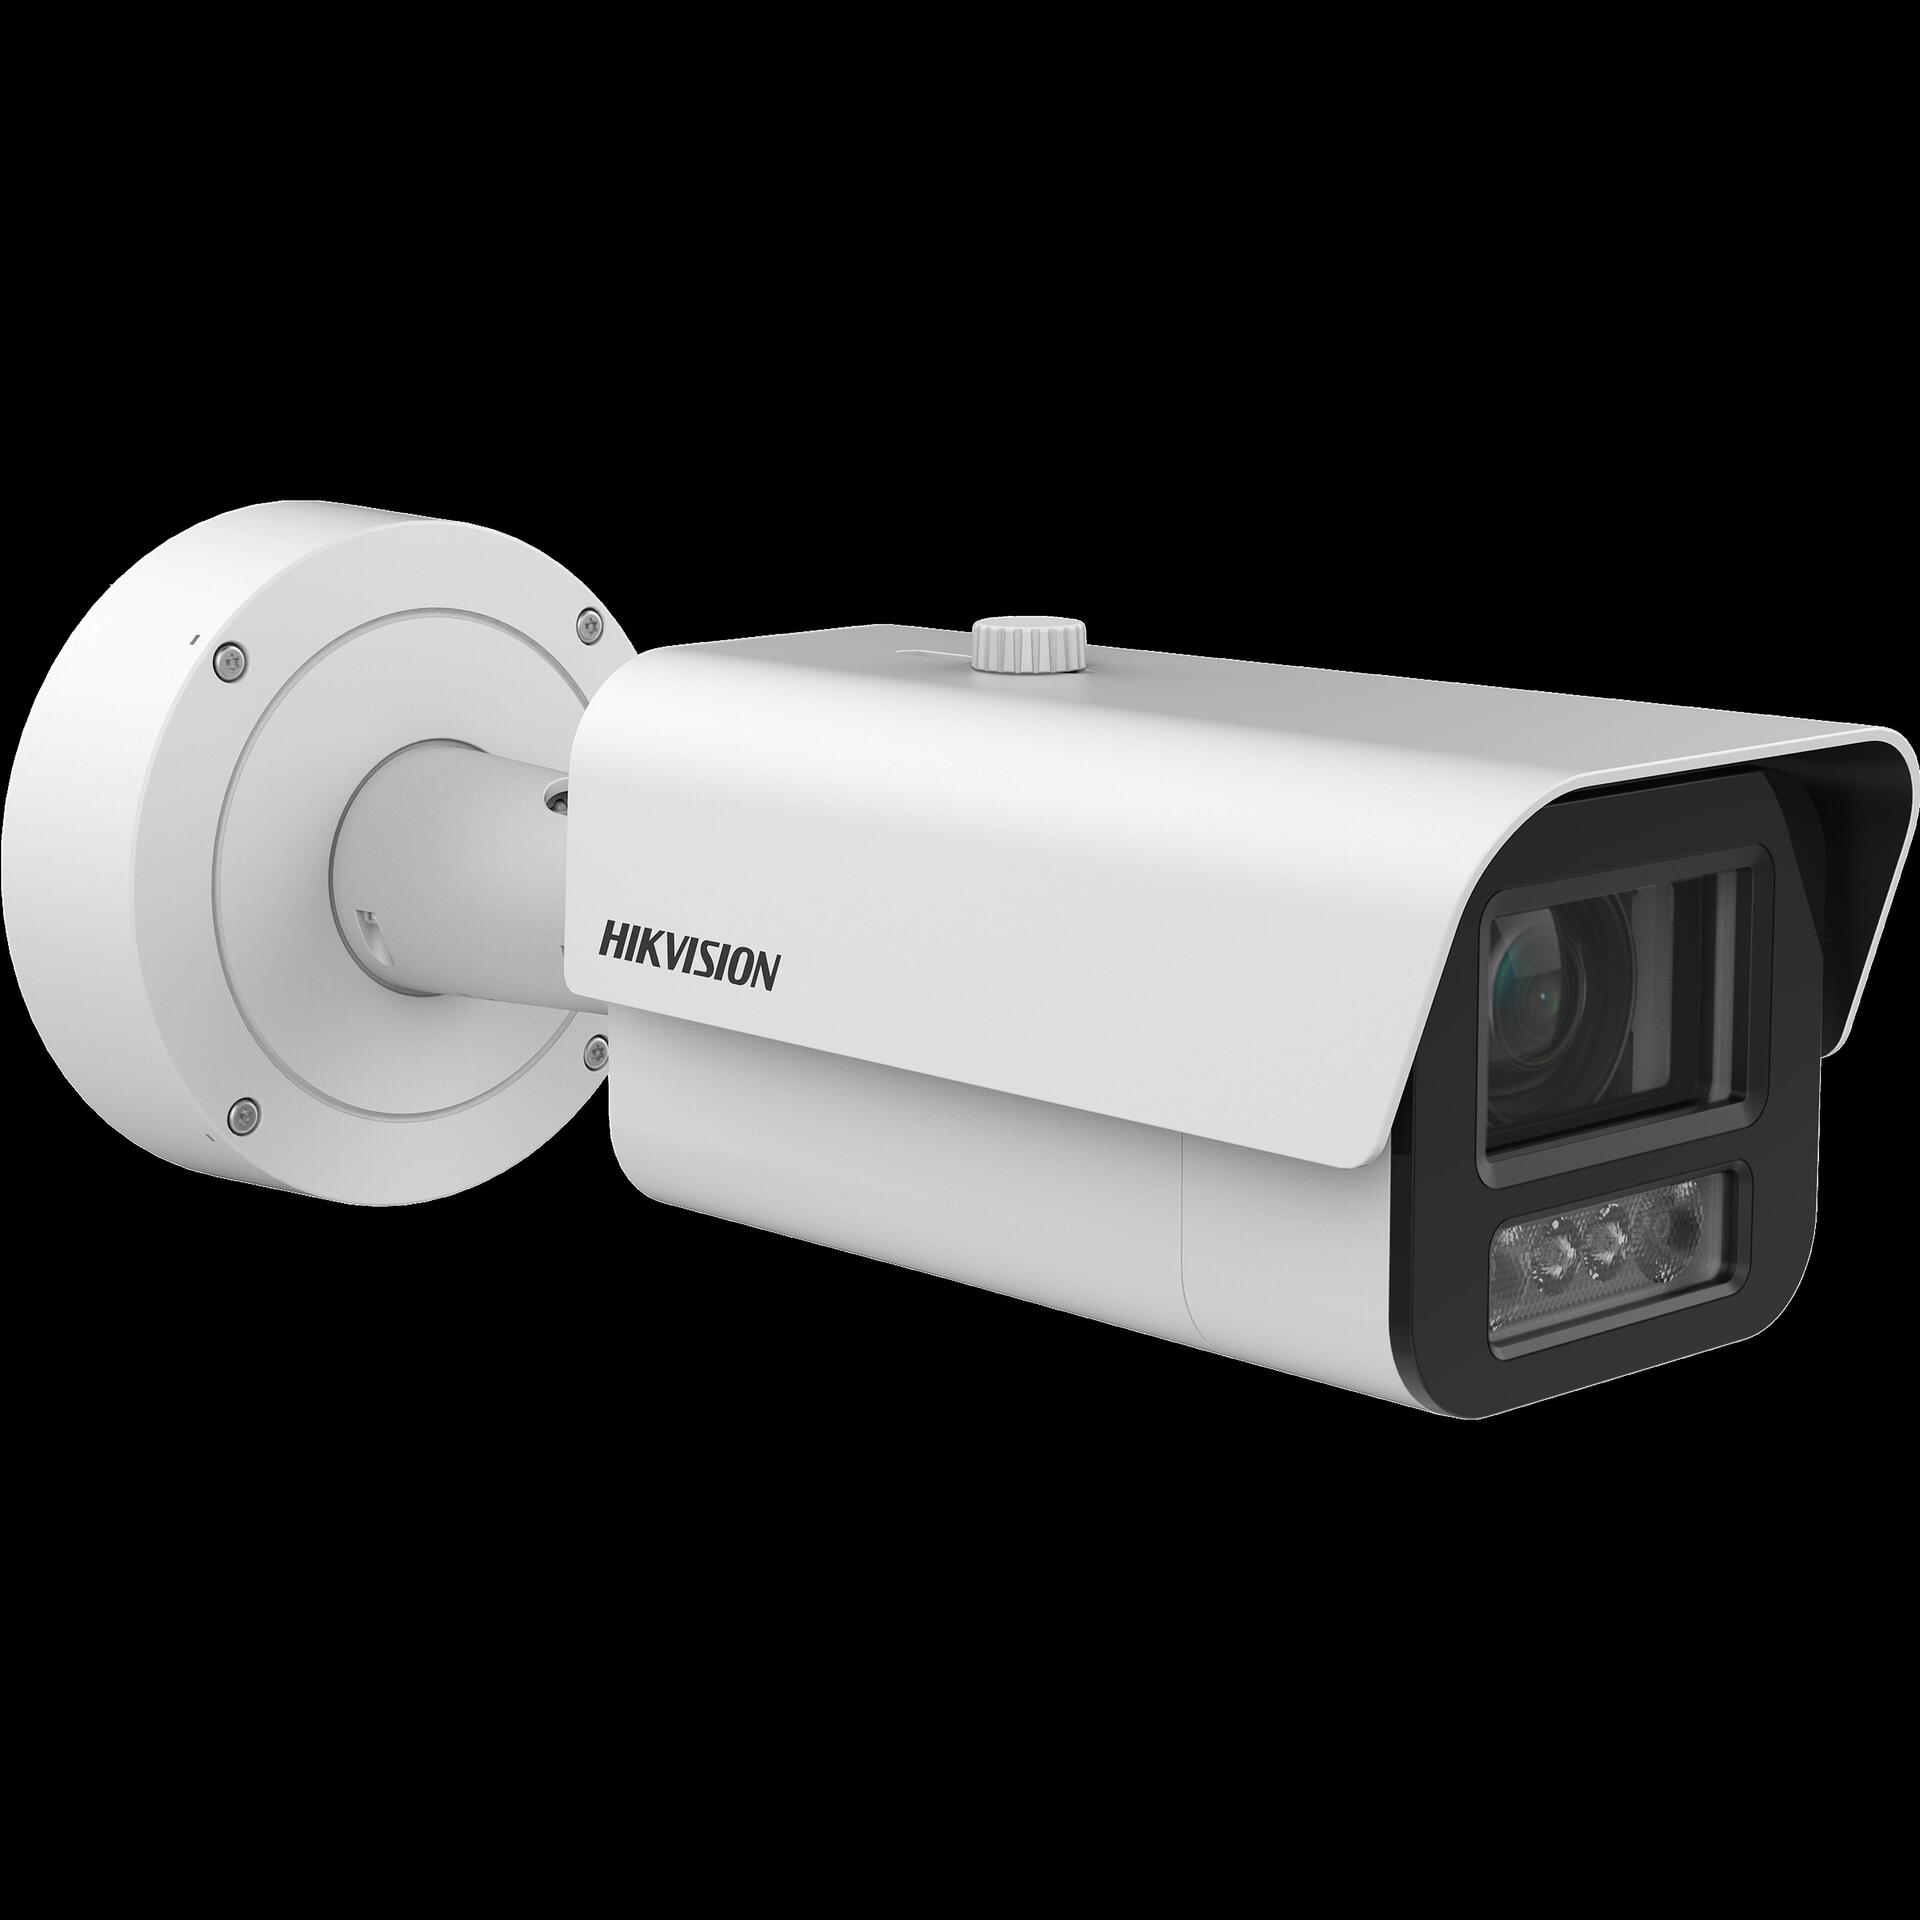 HIKVISION iDS-2CD7A47G0-XZHSY(2.8-12mm) Bullet 4MP DeepinView (iDS-2CD7A47G0-XZHSY(2.8-12mm)@)